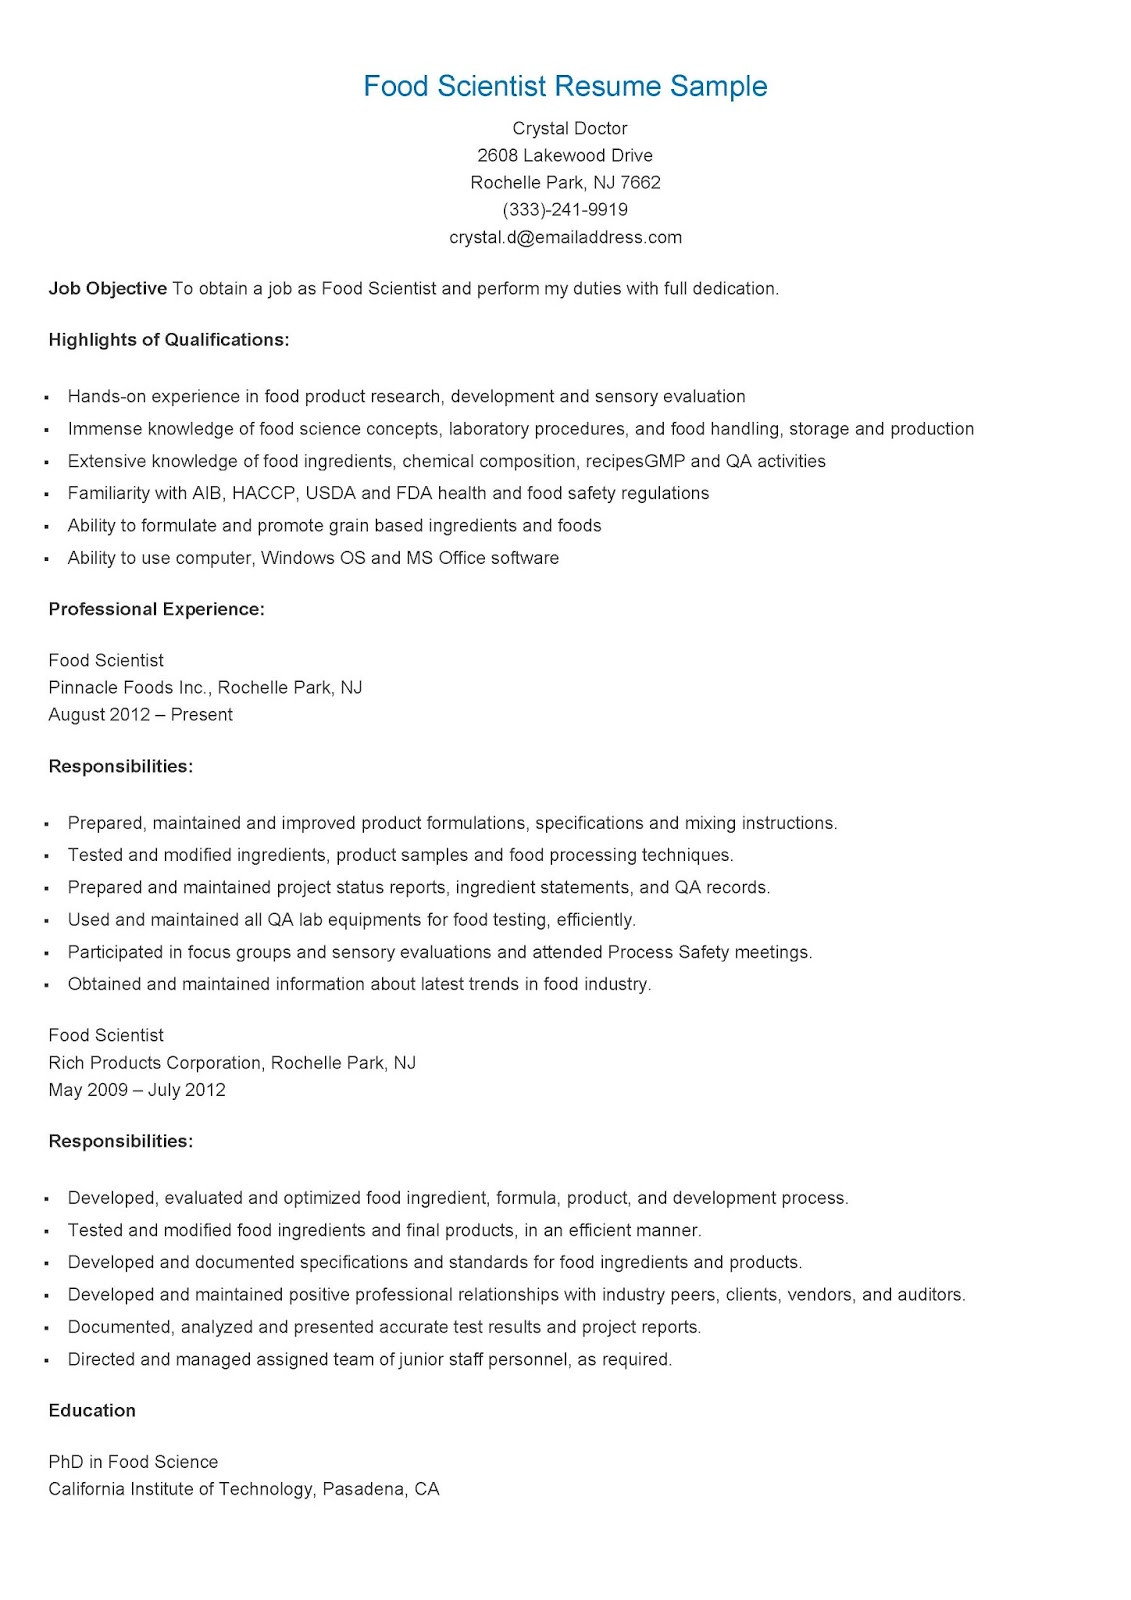 Food Science and Technology Resume Sample Resume Samples Food Scientist Resume Sample